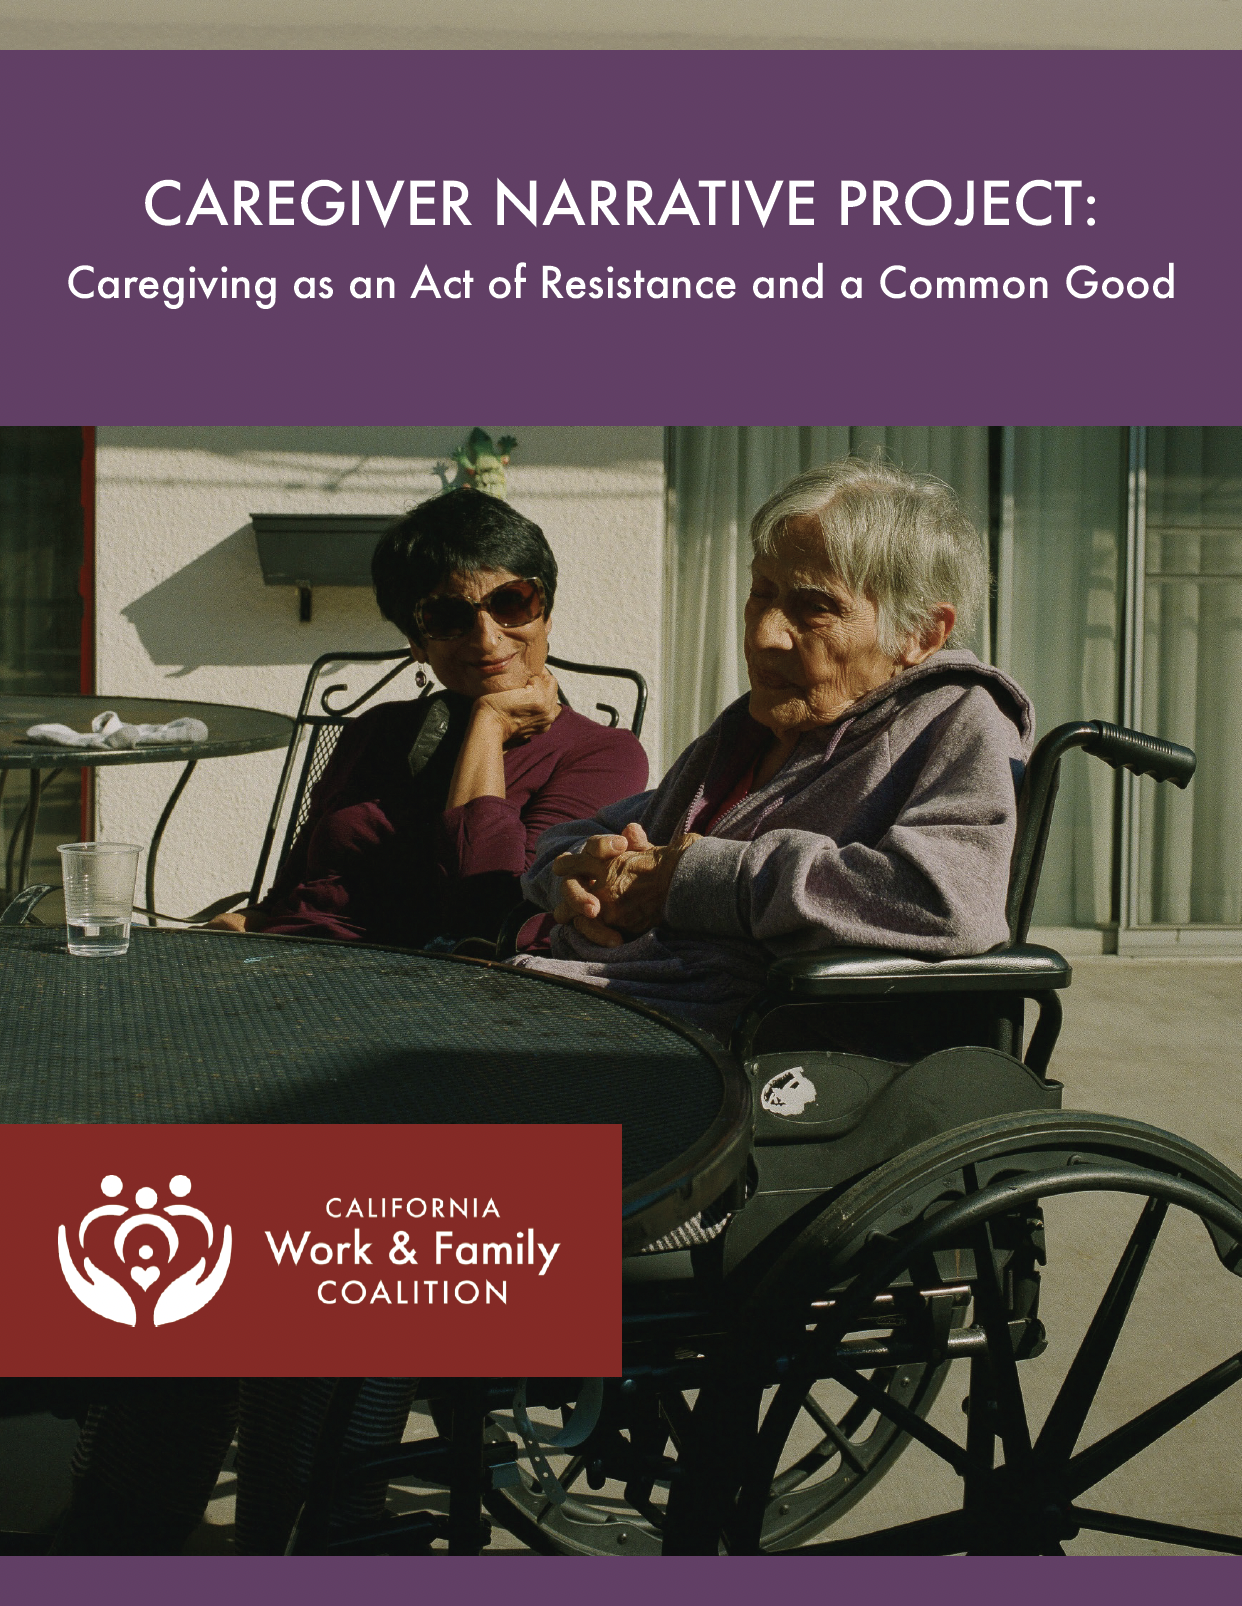 report cover. Two women are seated at a table outside on a sunny day. One woman is older and in a wheelchair. The other appears to be a caregiver or companion at her side.